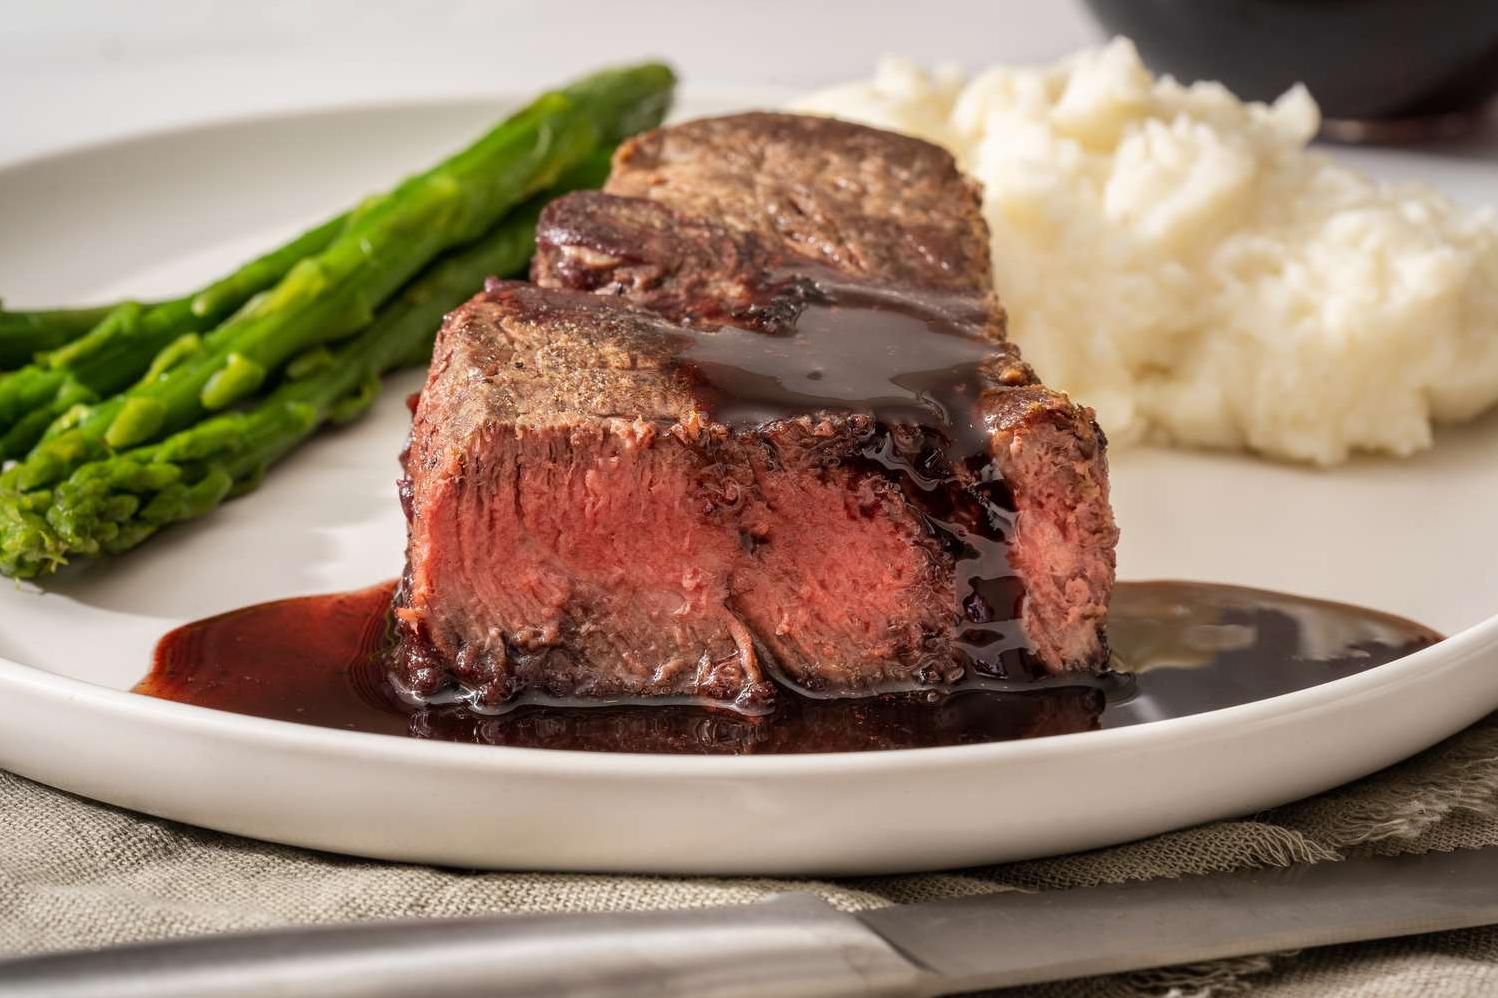  Add a burst of flavor to your steak with this easy-to-make Merlot sauce.